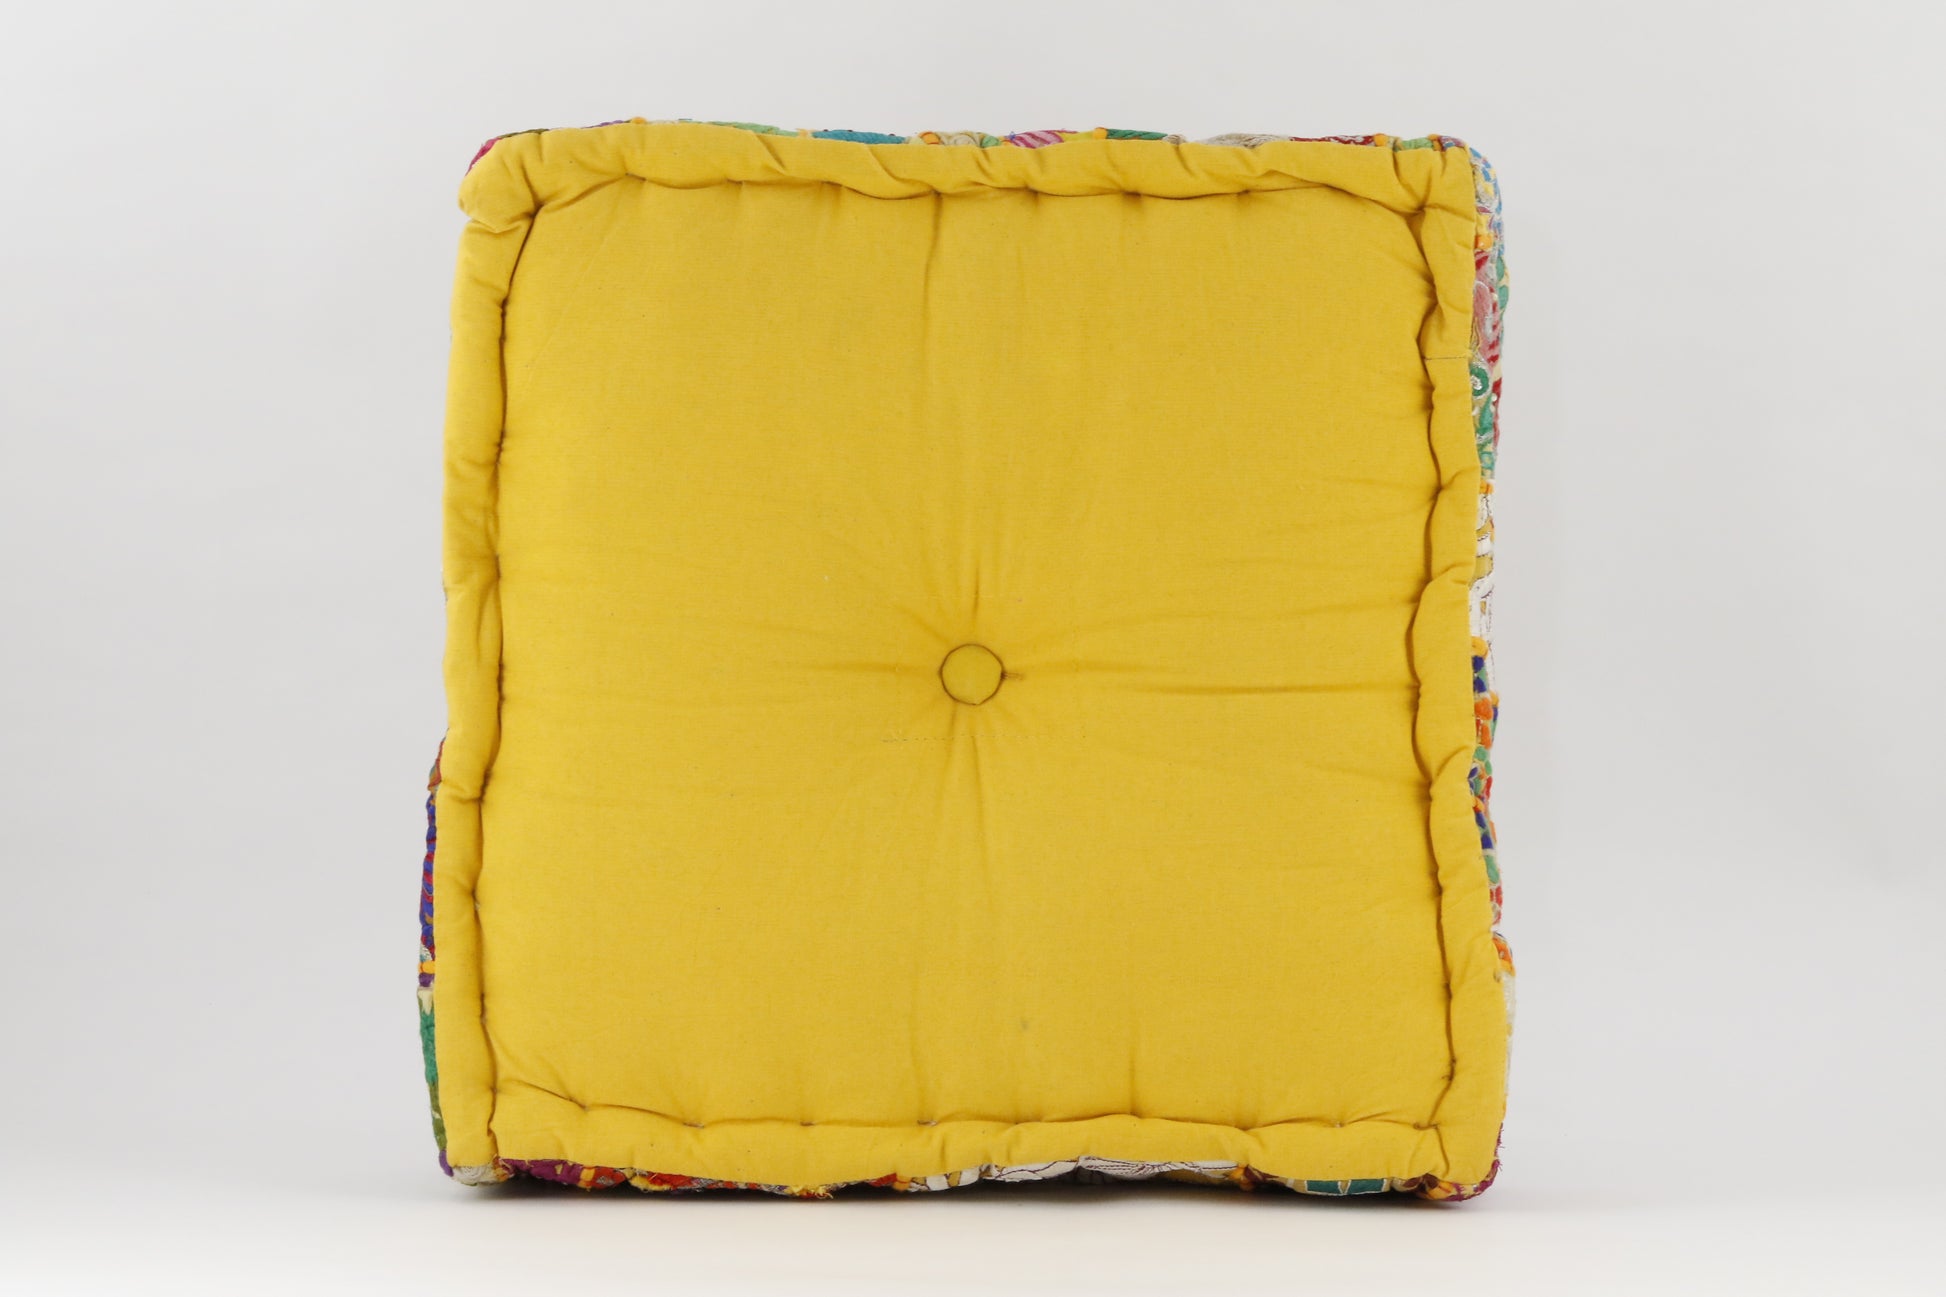 MEDITATION CUSHION YELLOW EMBROIDERED SQUARE BACK VIEW